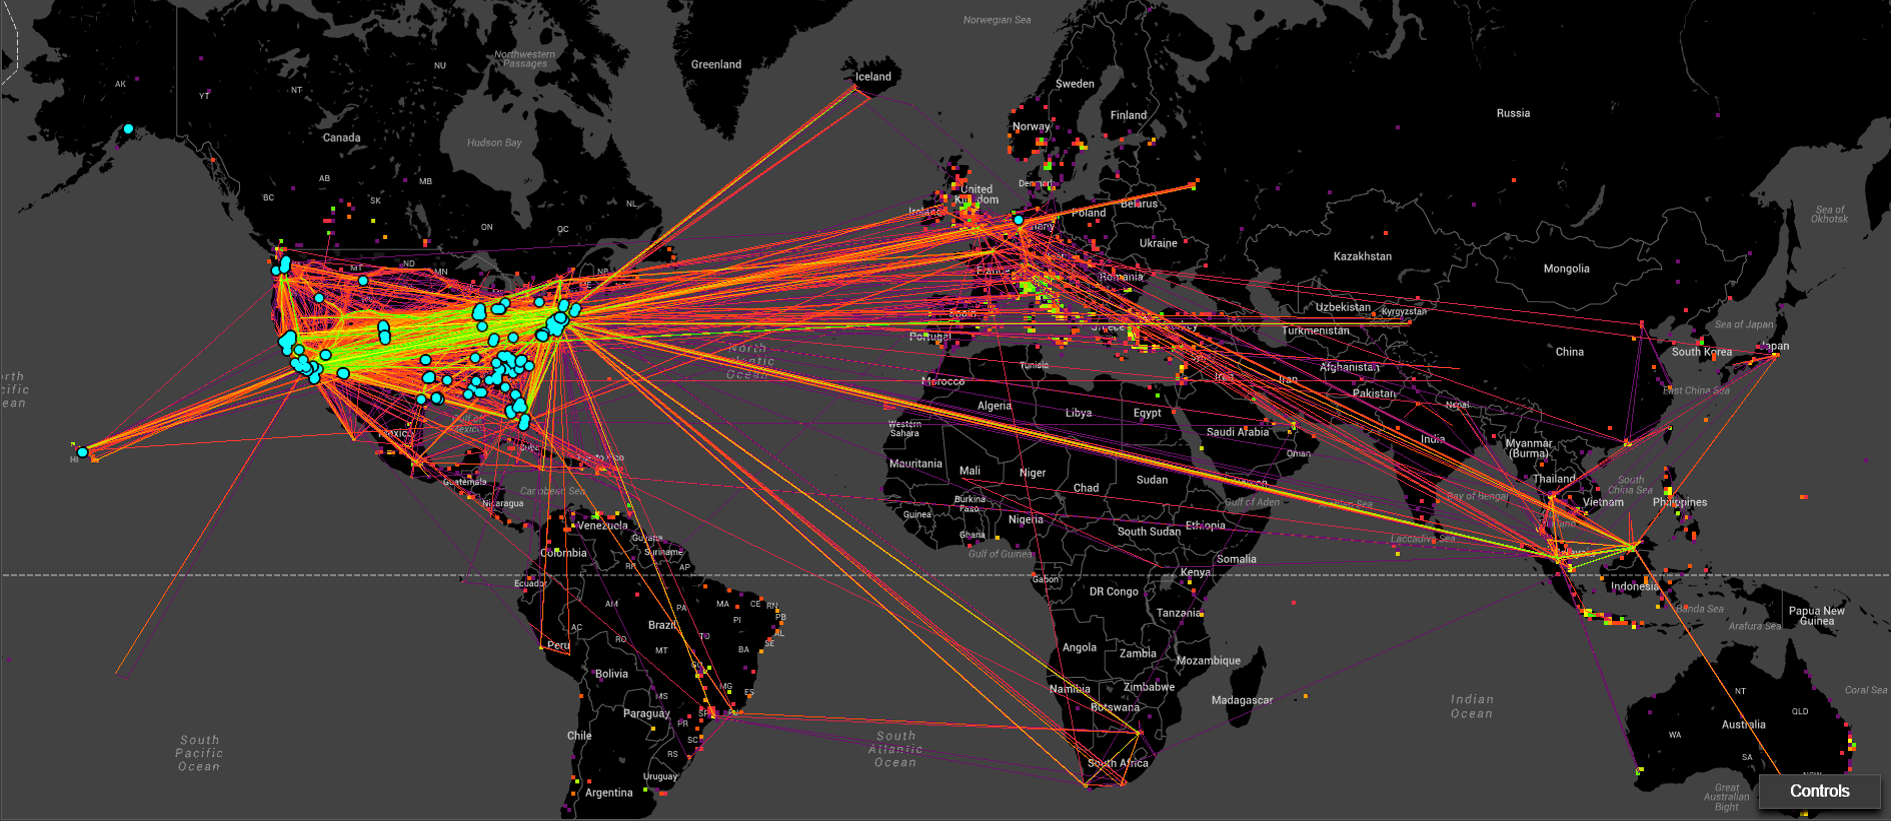 This heat map of human trafficking activity across the world is one of the tools that is part of DARPA's Memex program, designed to help law enforcement officers and others do investigations online and hunt down human traffickers. DARPA graphic. -